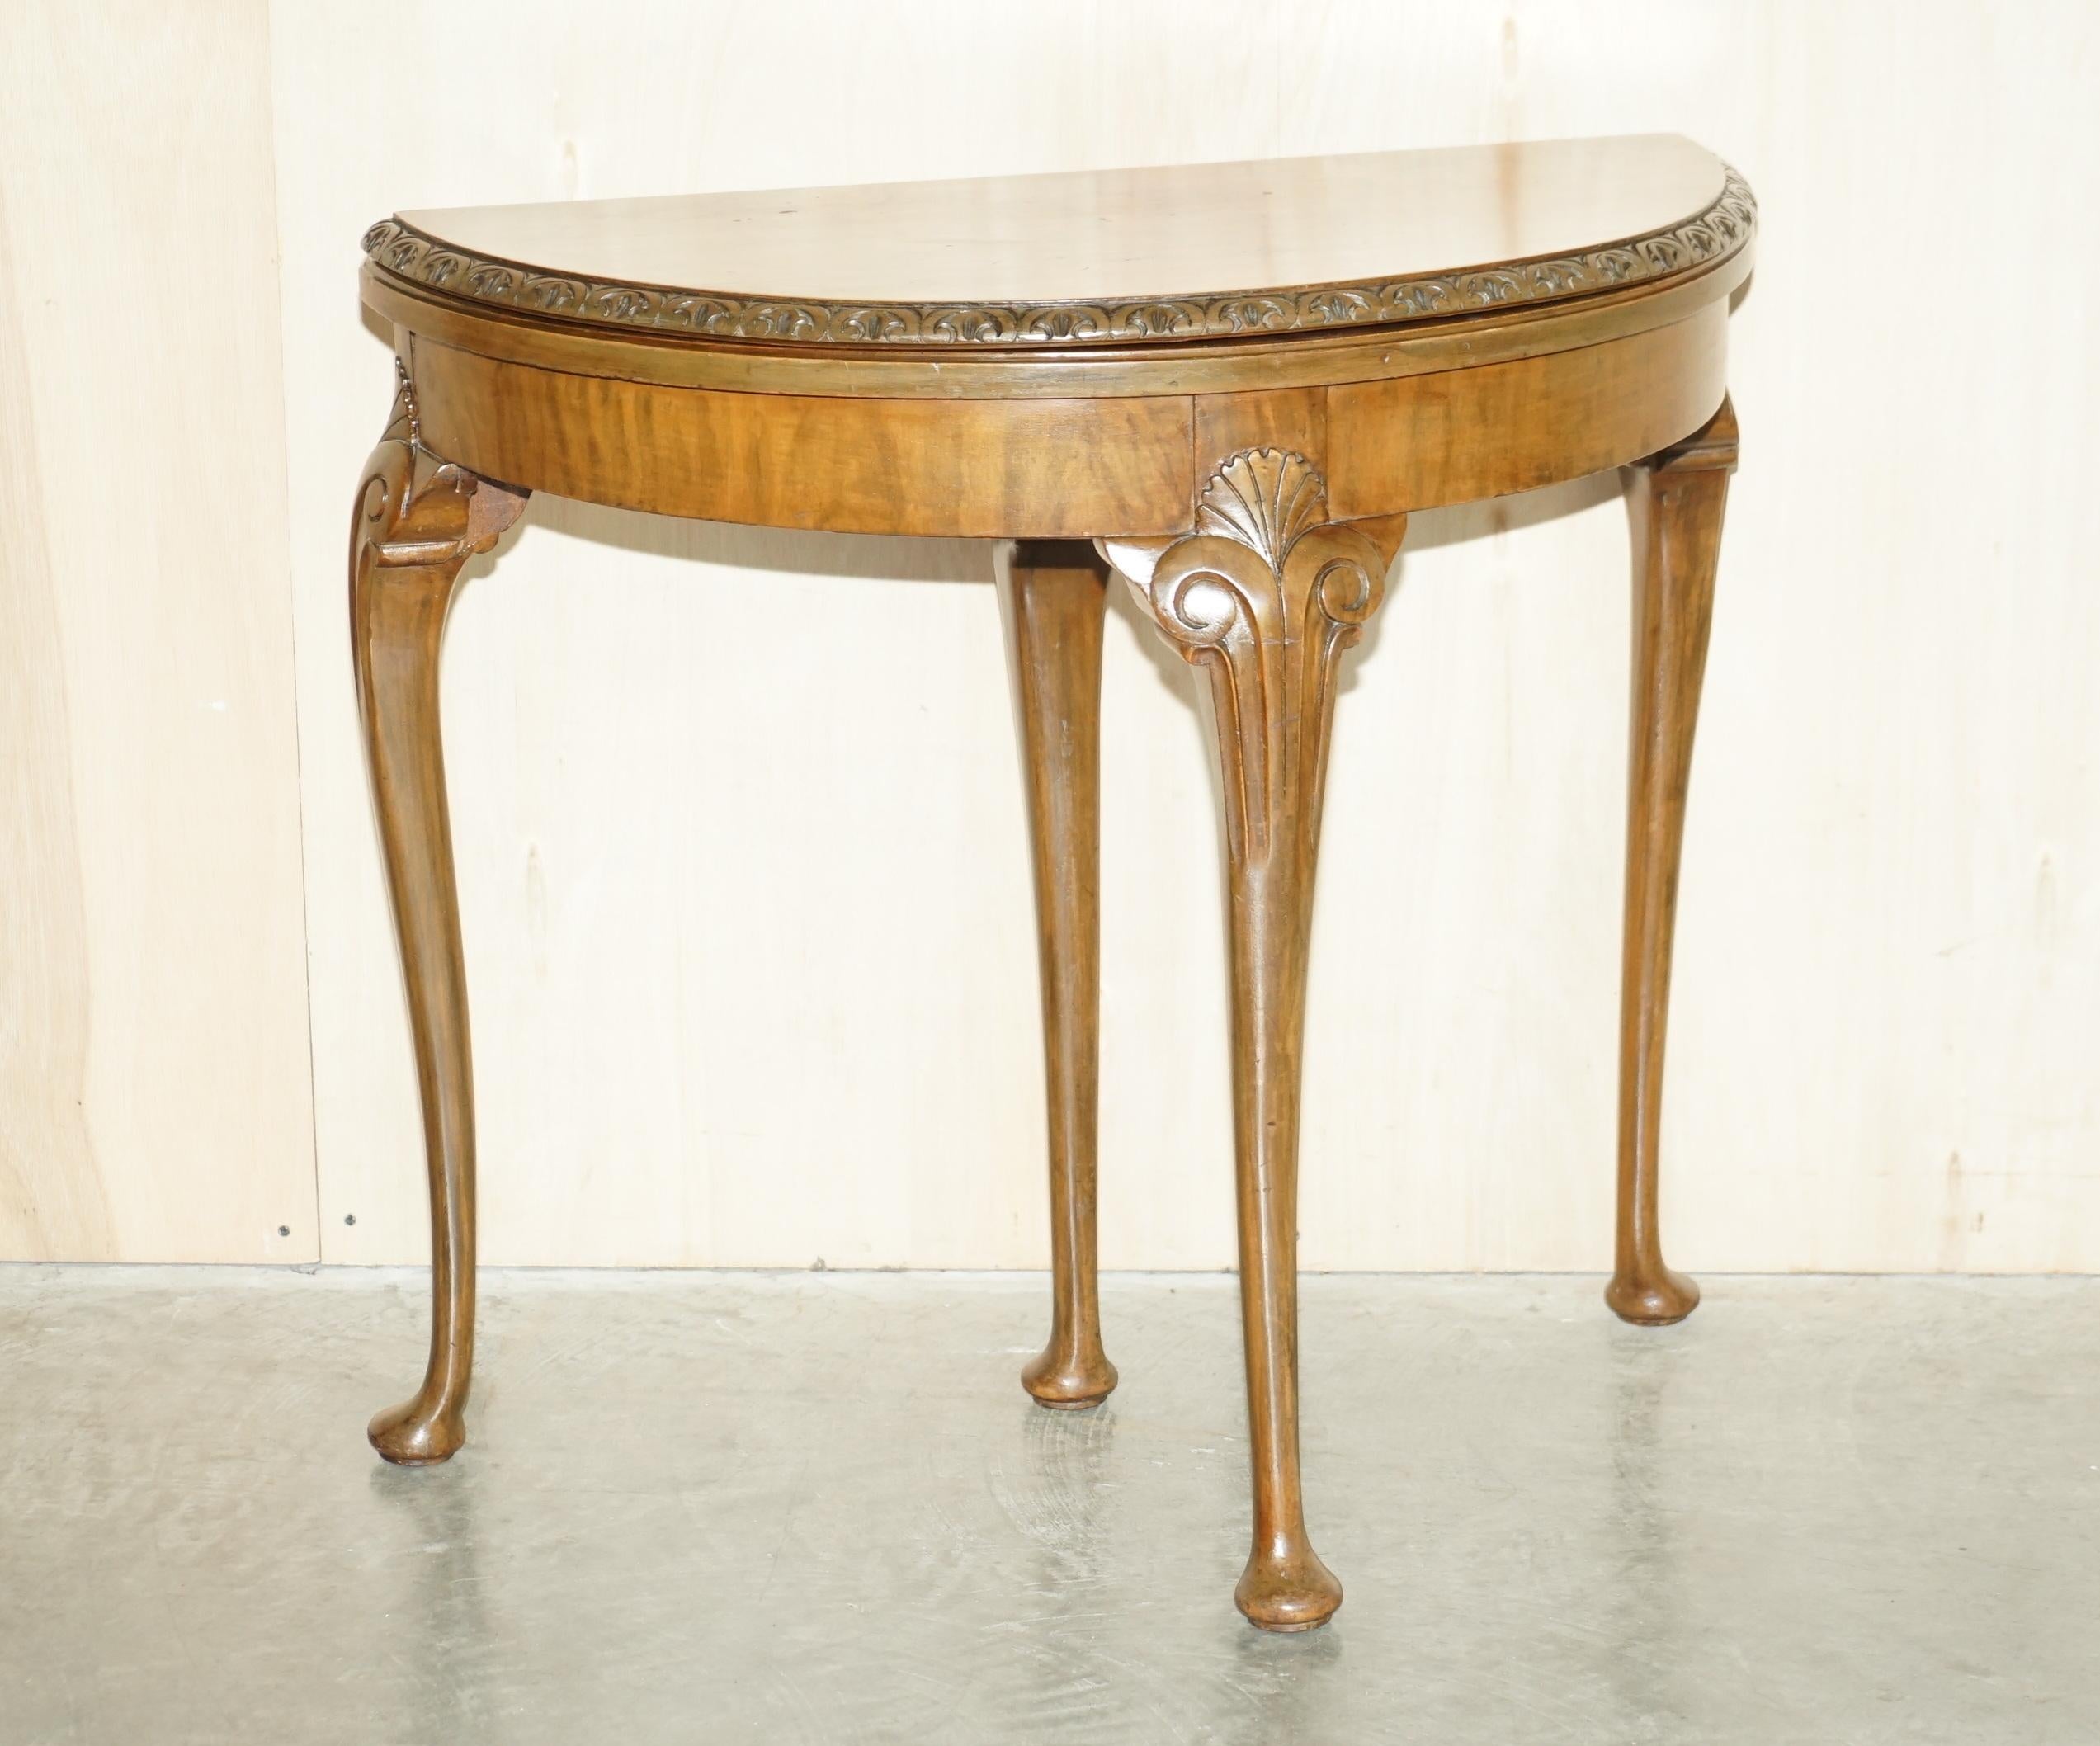 We are delighted to offer for sale this lovely circa 1880-1900 burr walnut demi lune games card table with ornately carved legs

A very good looking and well made piece, made in the Regency style however it is late Victorian. The legs are